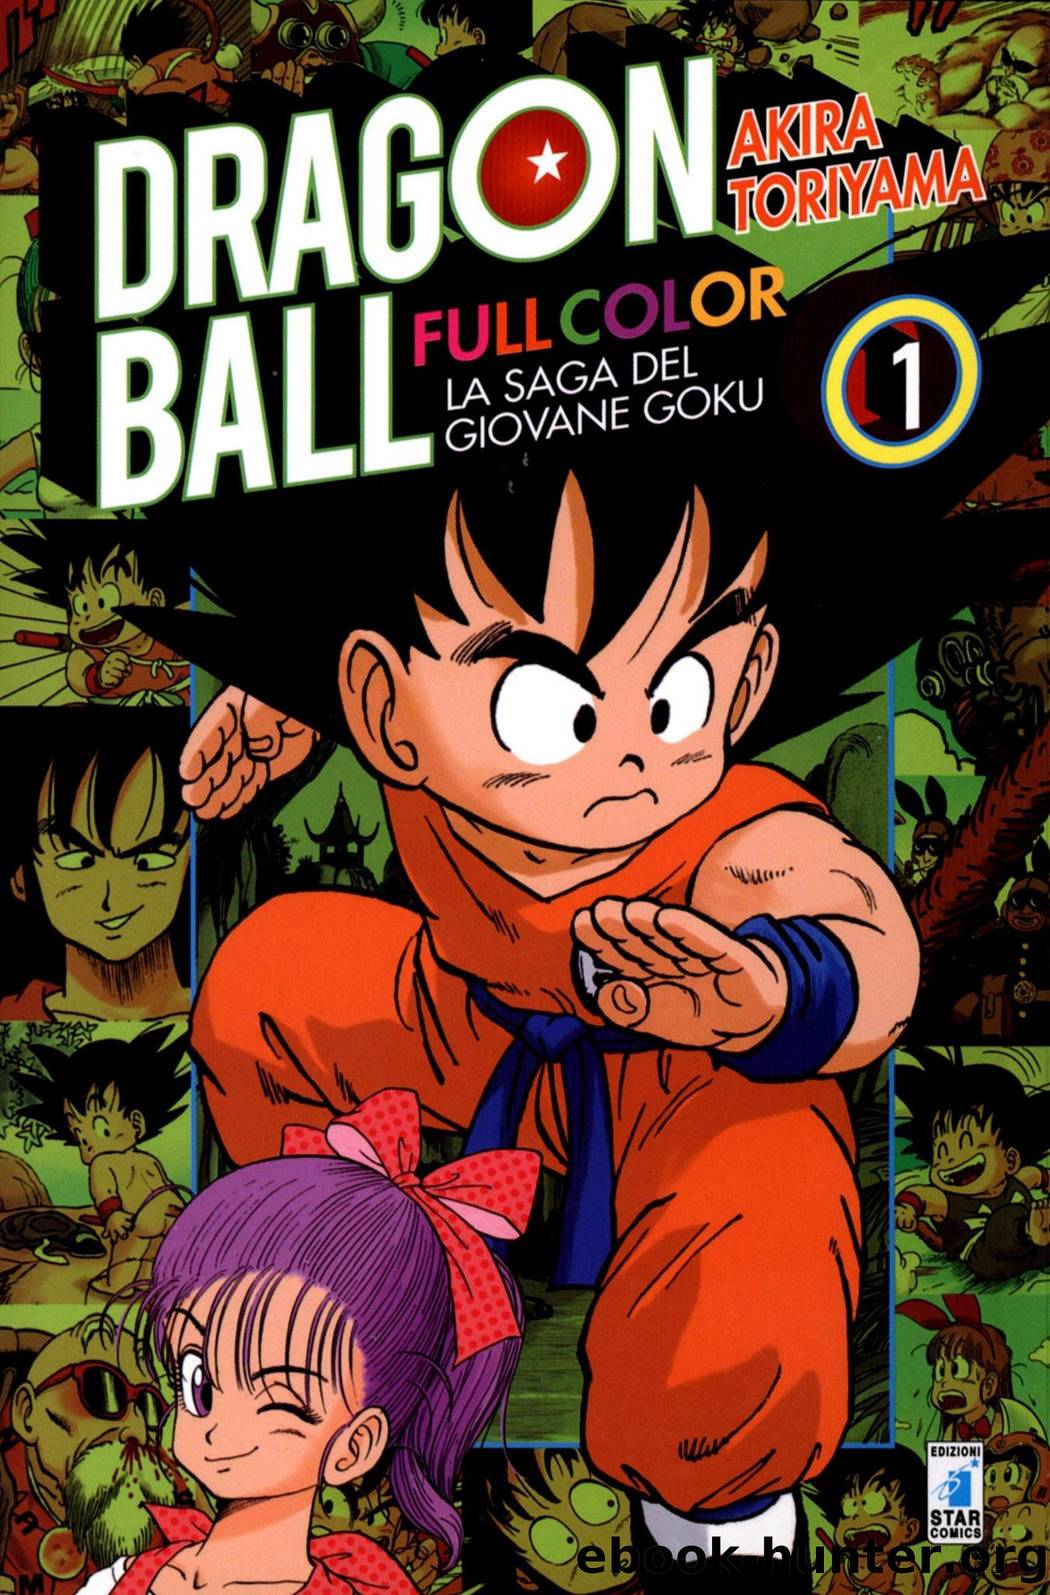 Dragon Ball Full Color [Volume 1] by Unknown